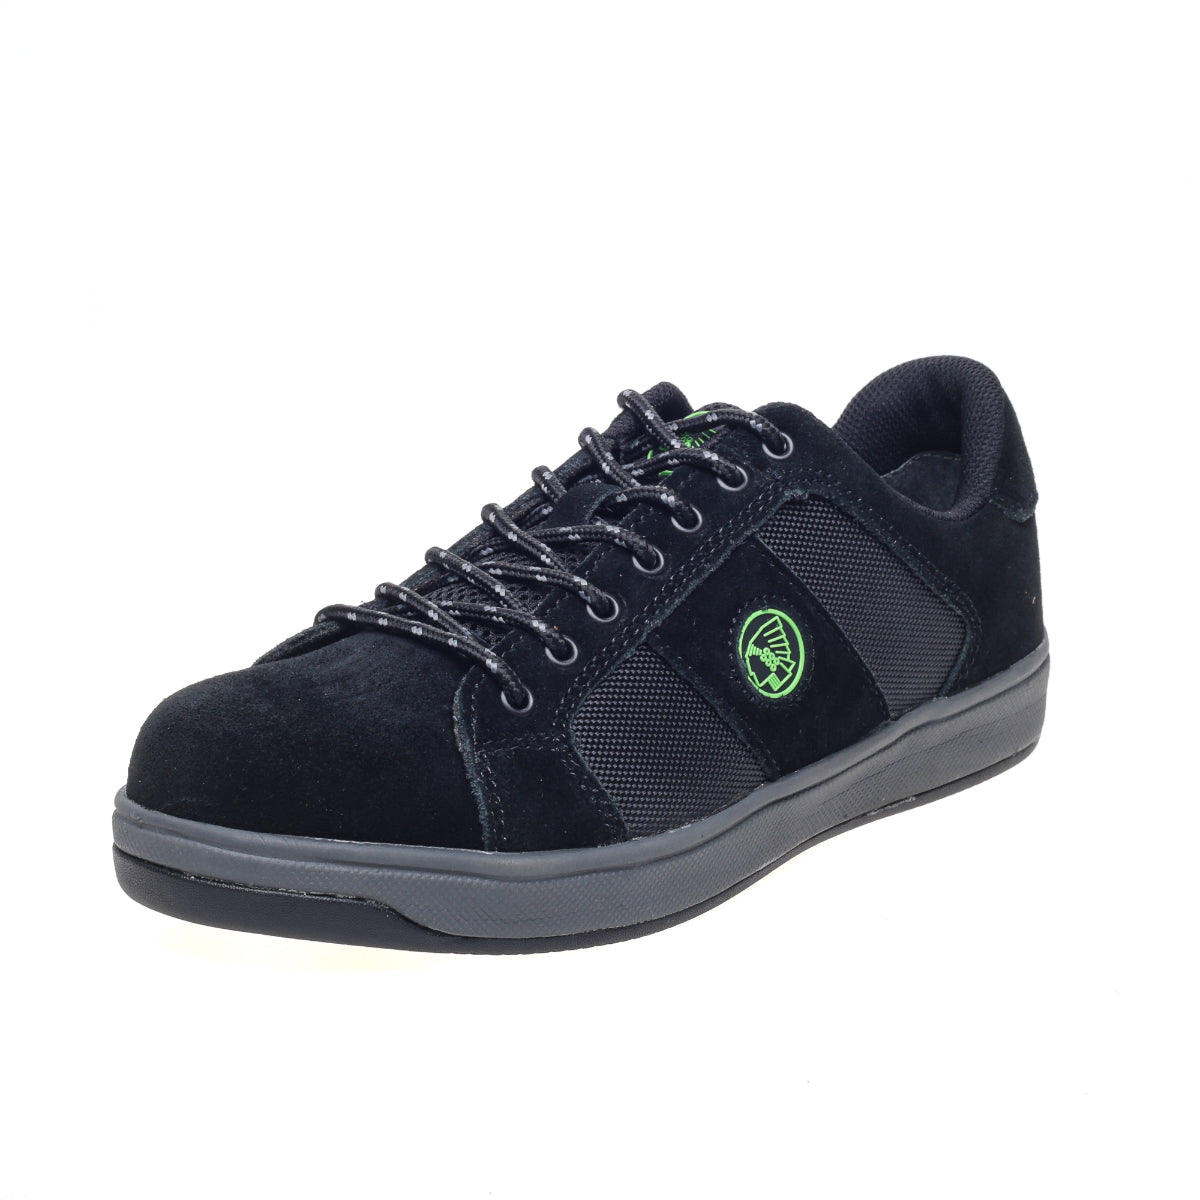 Apache Black Suede Cup Sole Safety Trainer